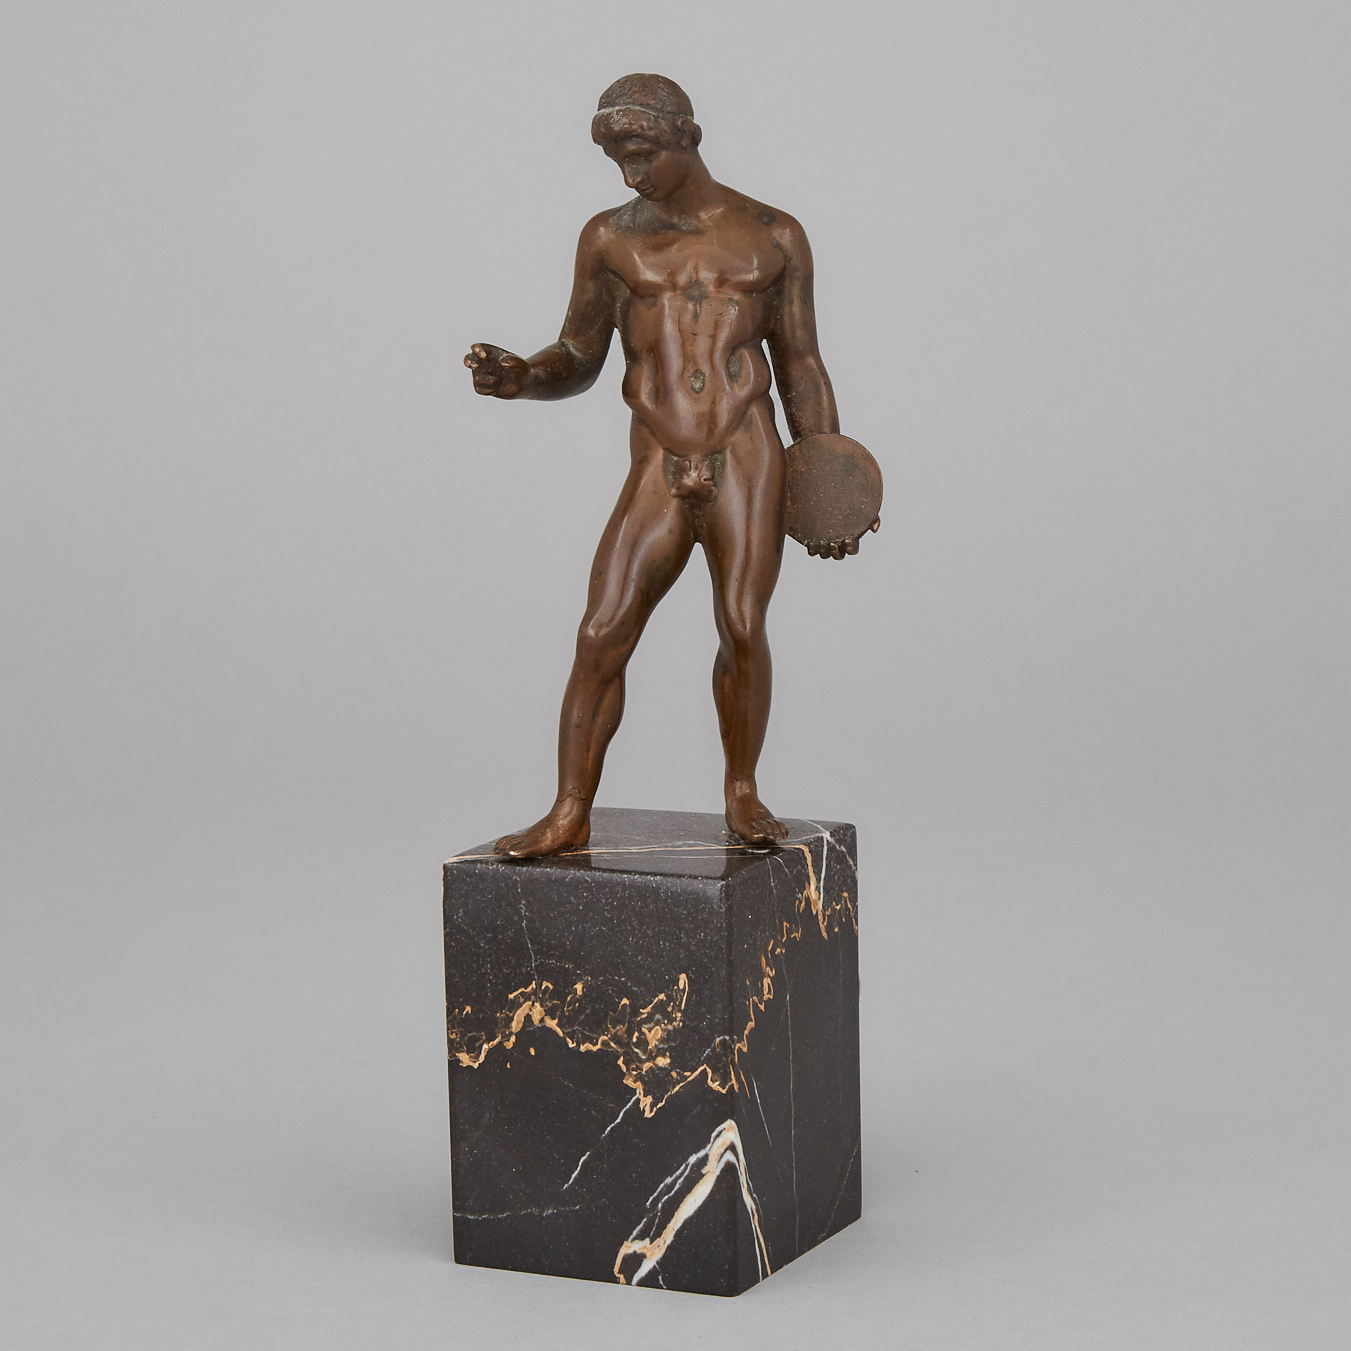 Small Patinated Bronze Figure of a Roman Discus Thrower, After the Antique, 19th/early 20th century